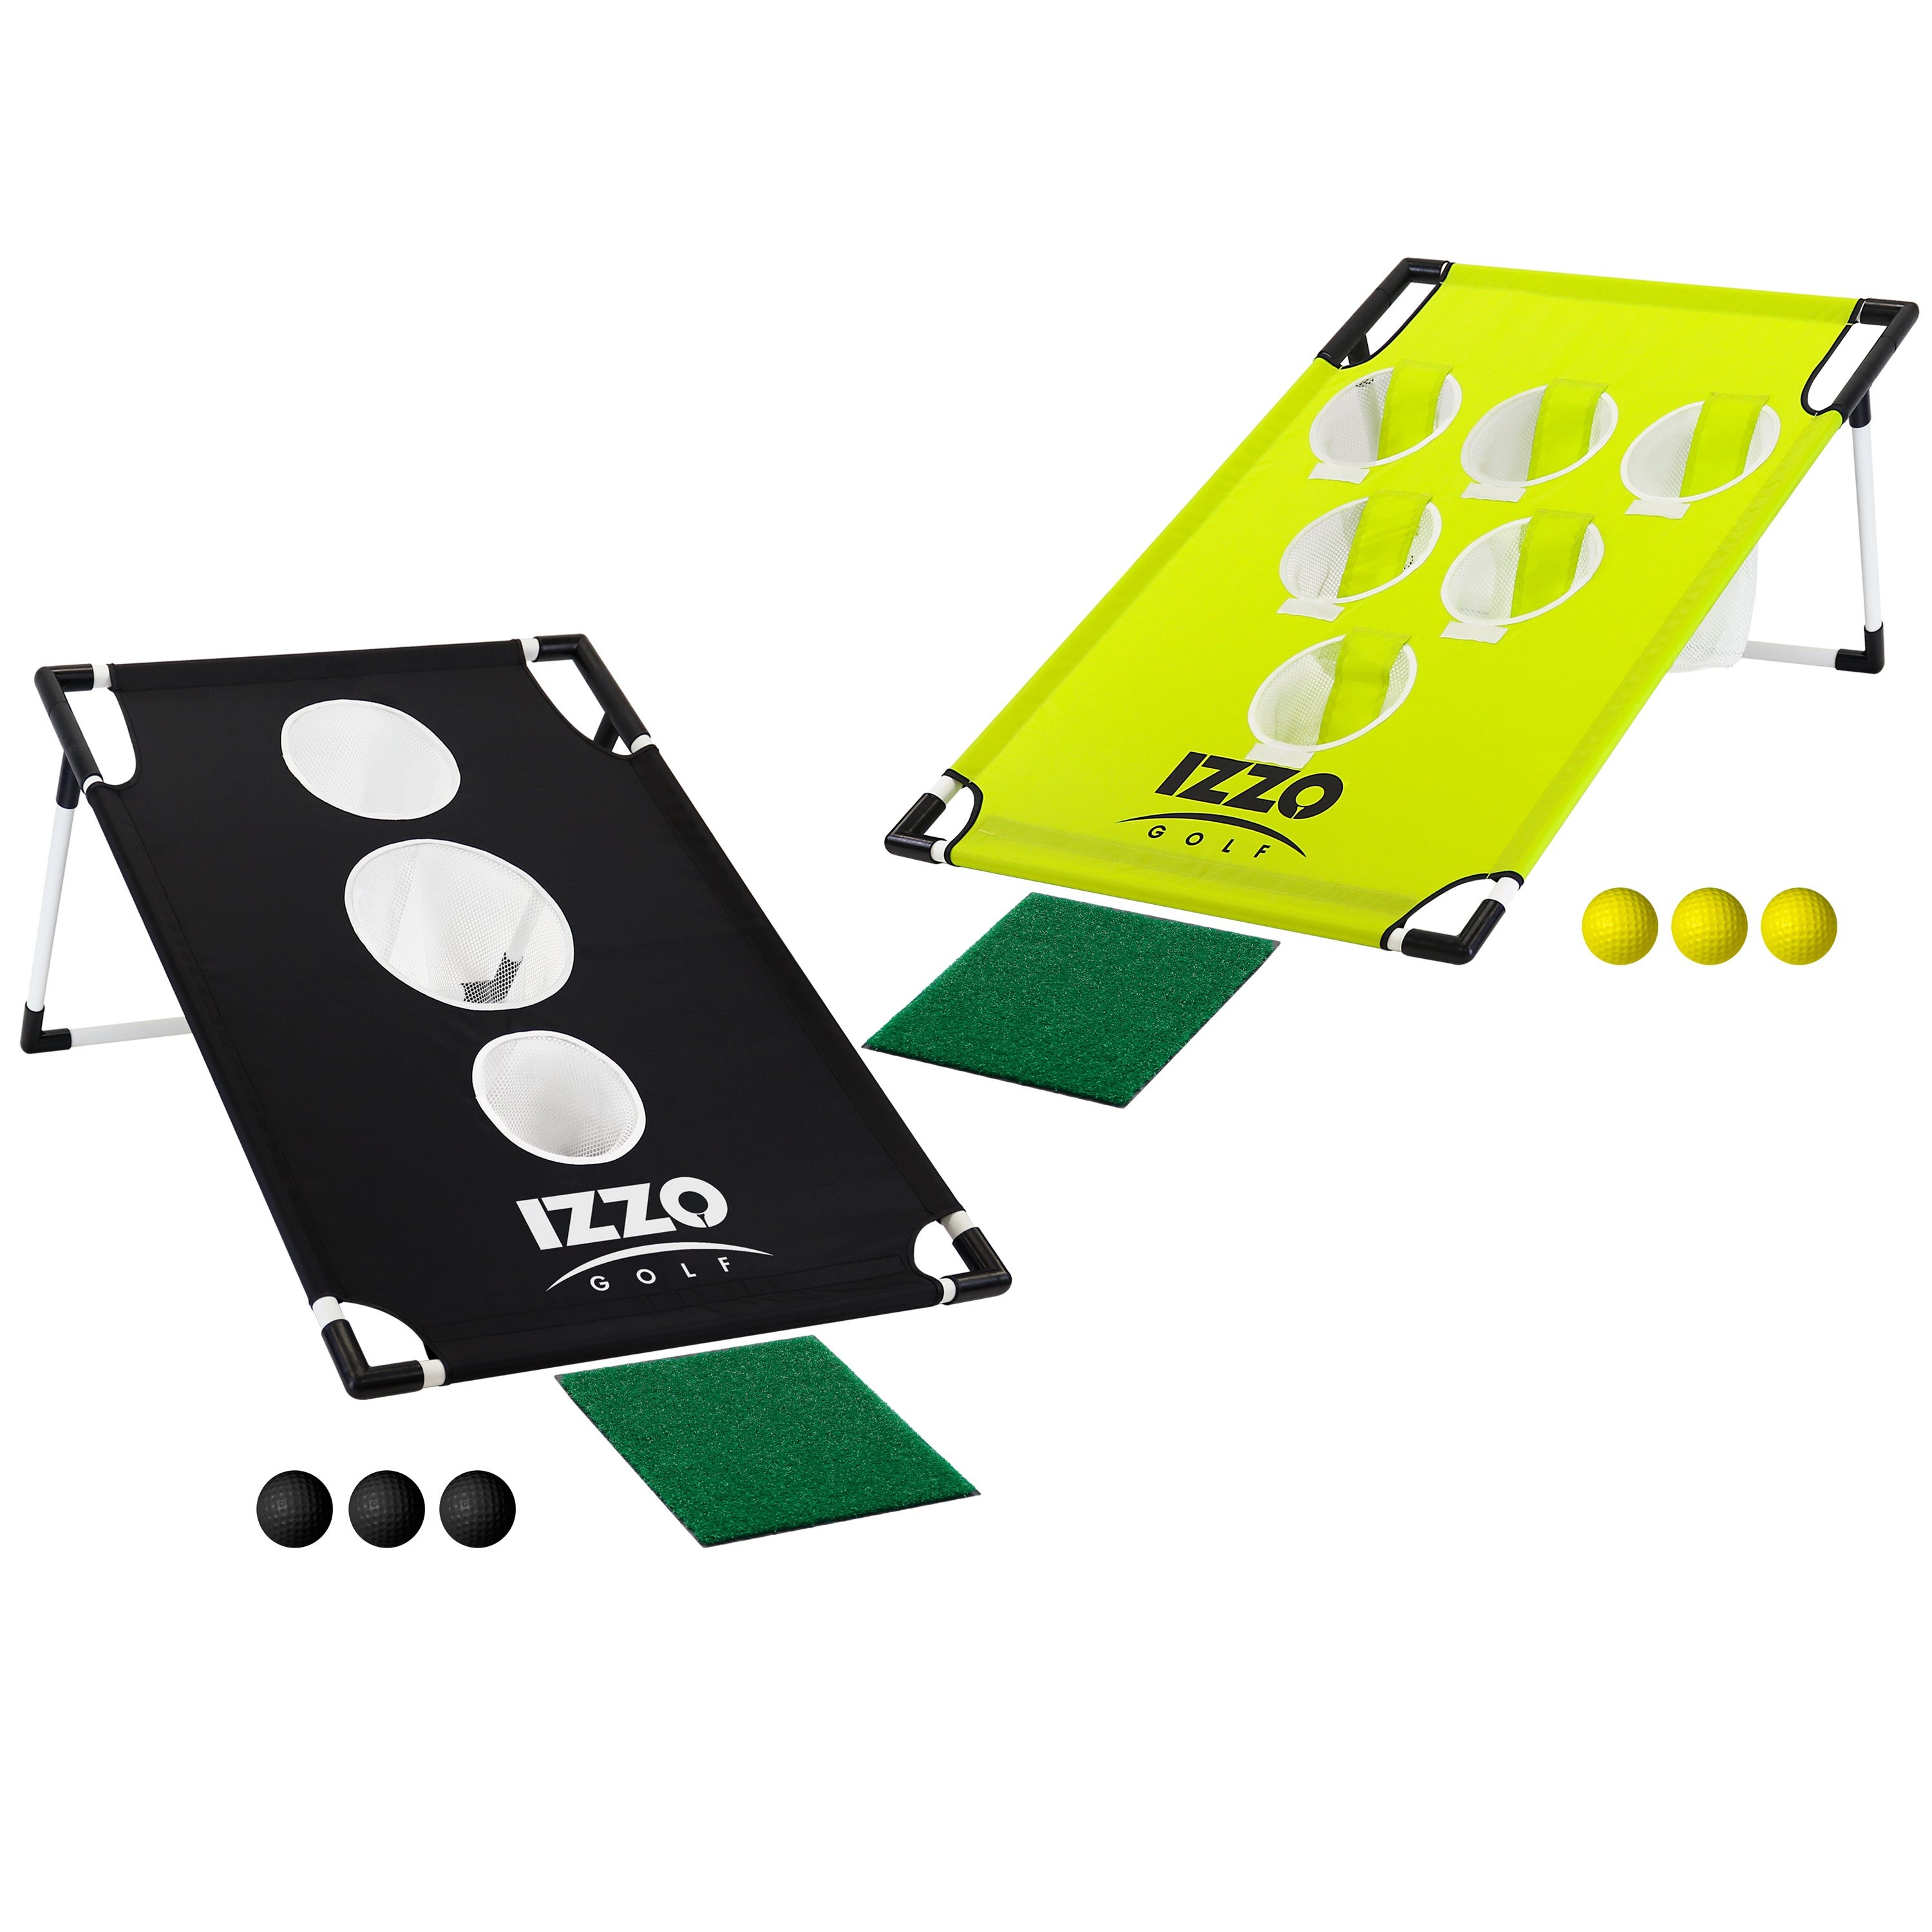 Pong-Hole Chipping Practice & Gaming Set